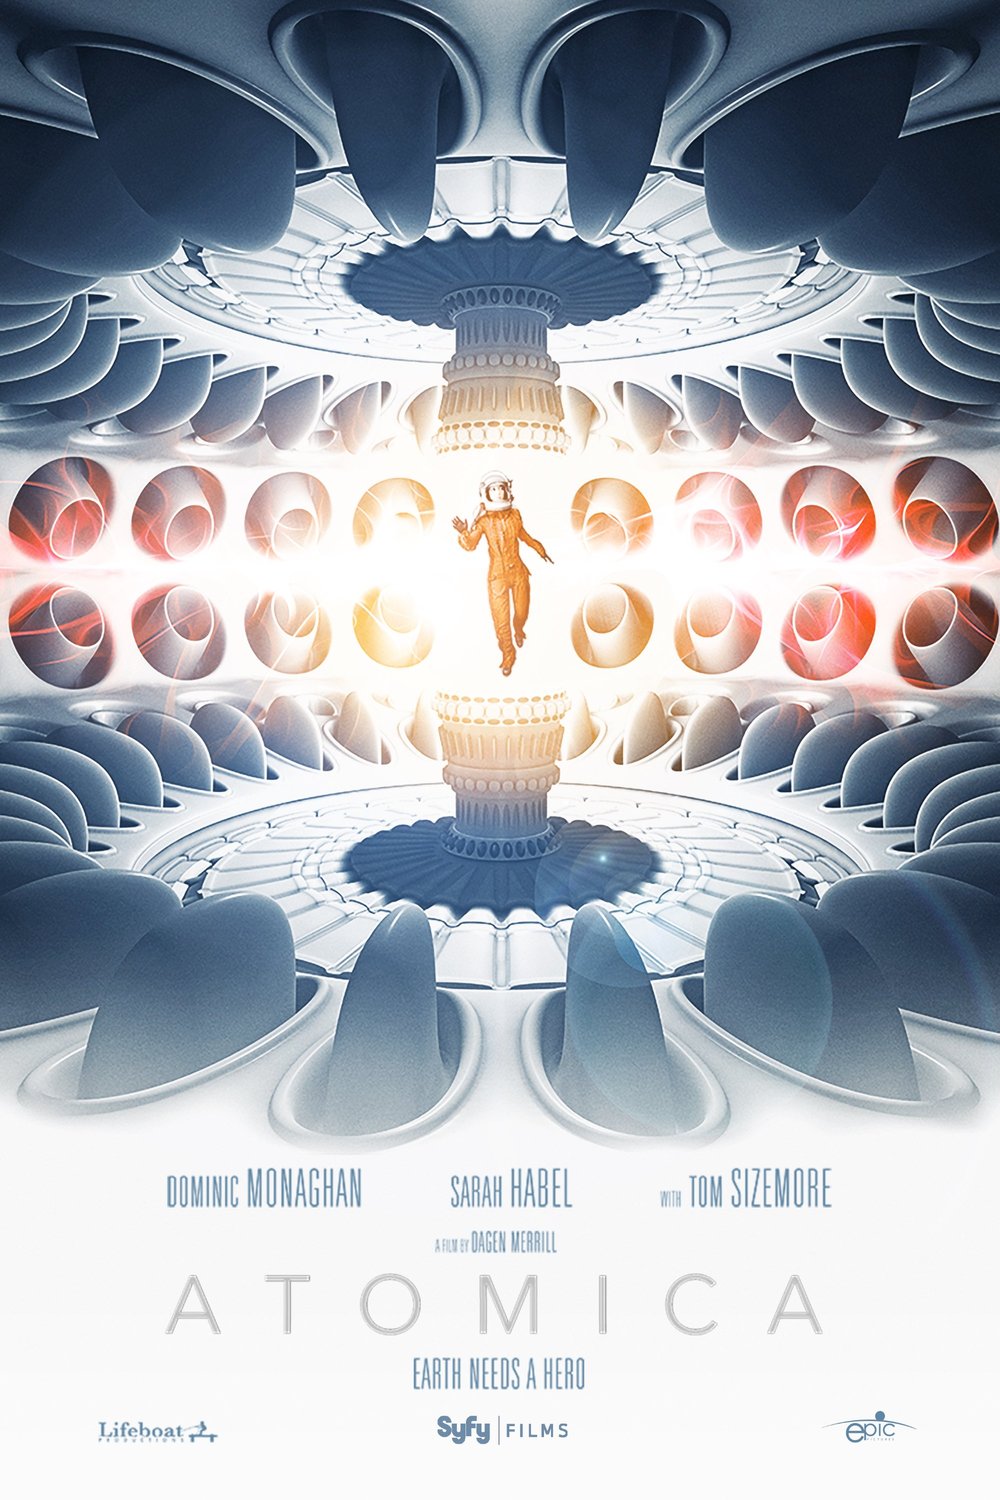 Poster of the movie Atomica